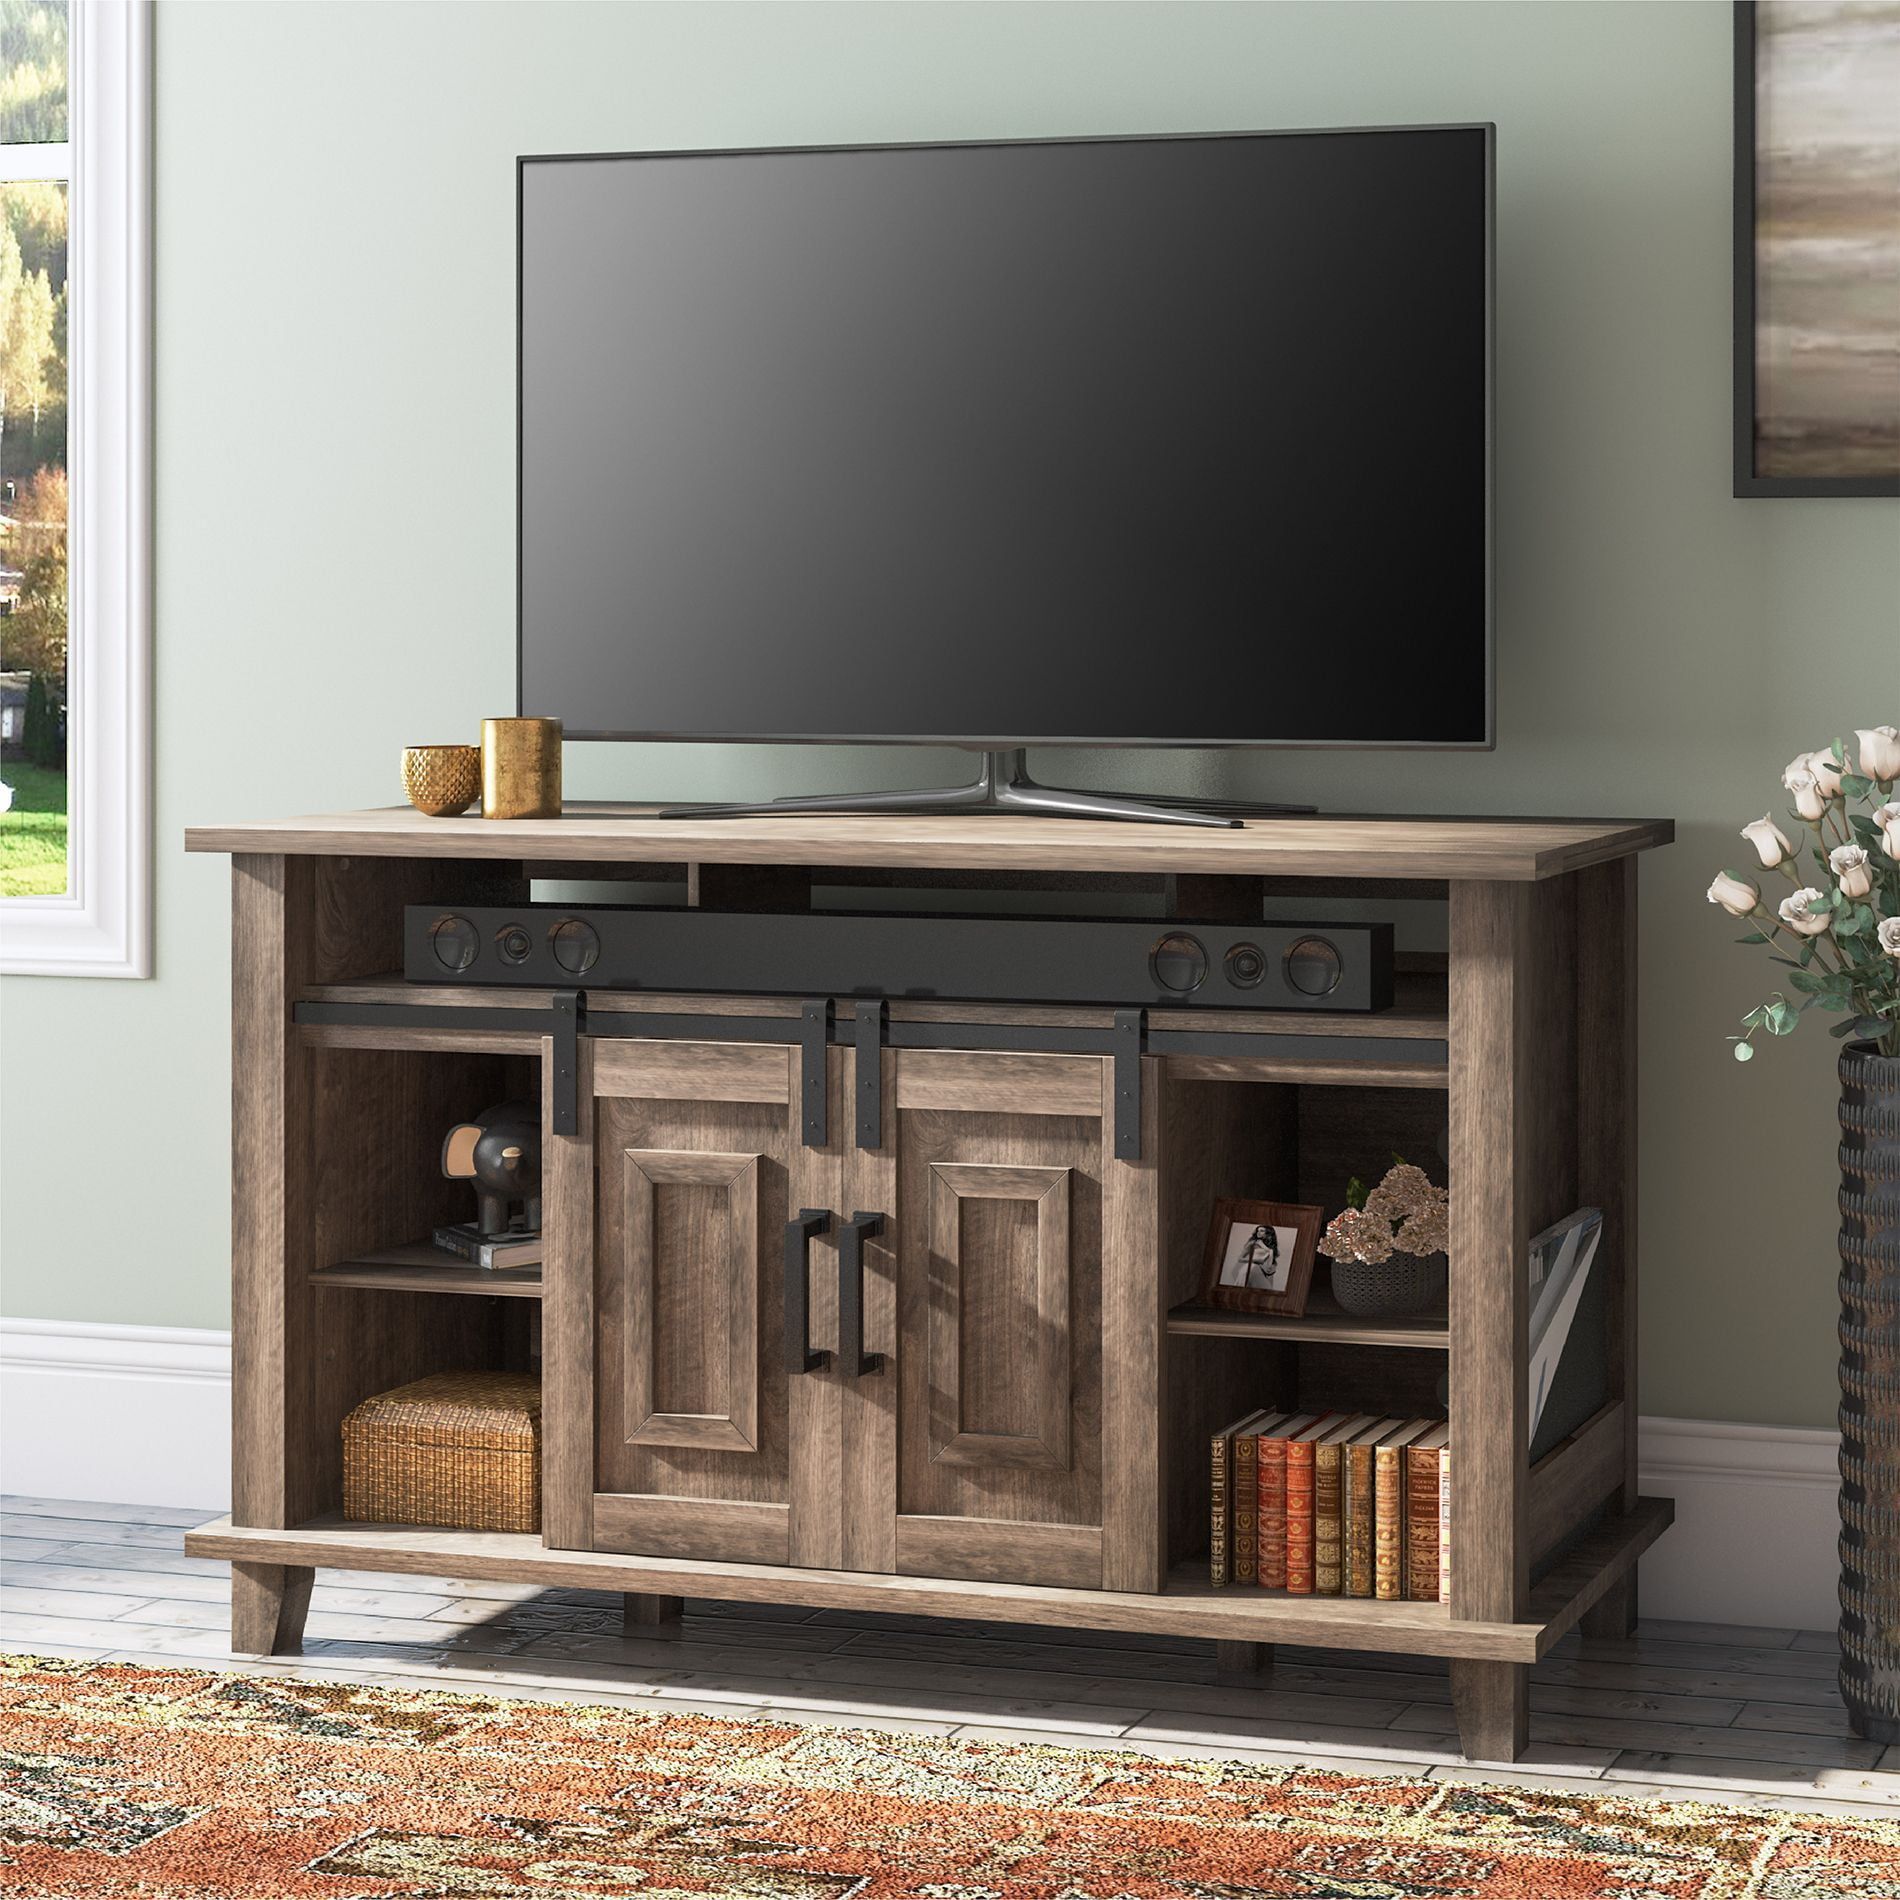 Wampat Farmhouse Sliding Barn Door Tv Stand, Gray Wood Tv Stands For 60 Within Modern Farmhouse Barn Tv Stands (View 14 of 20)